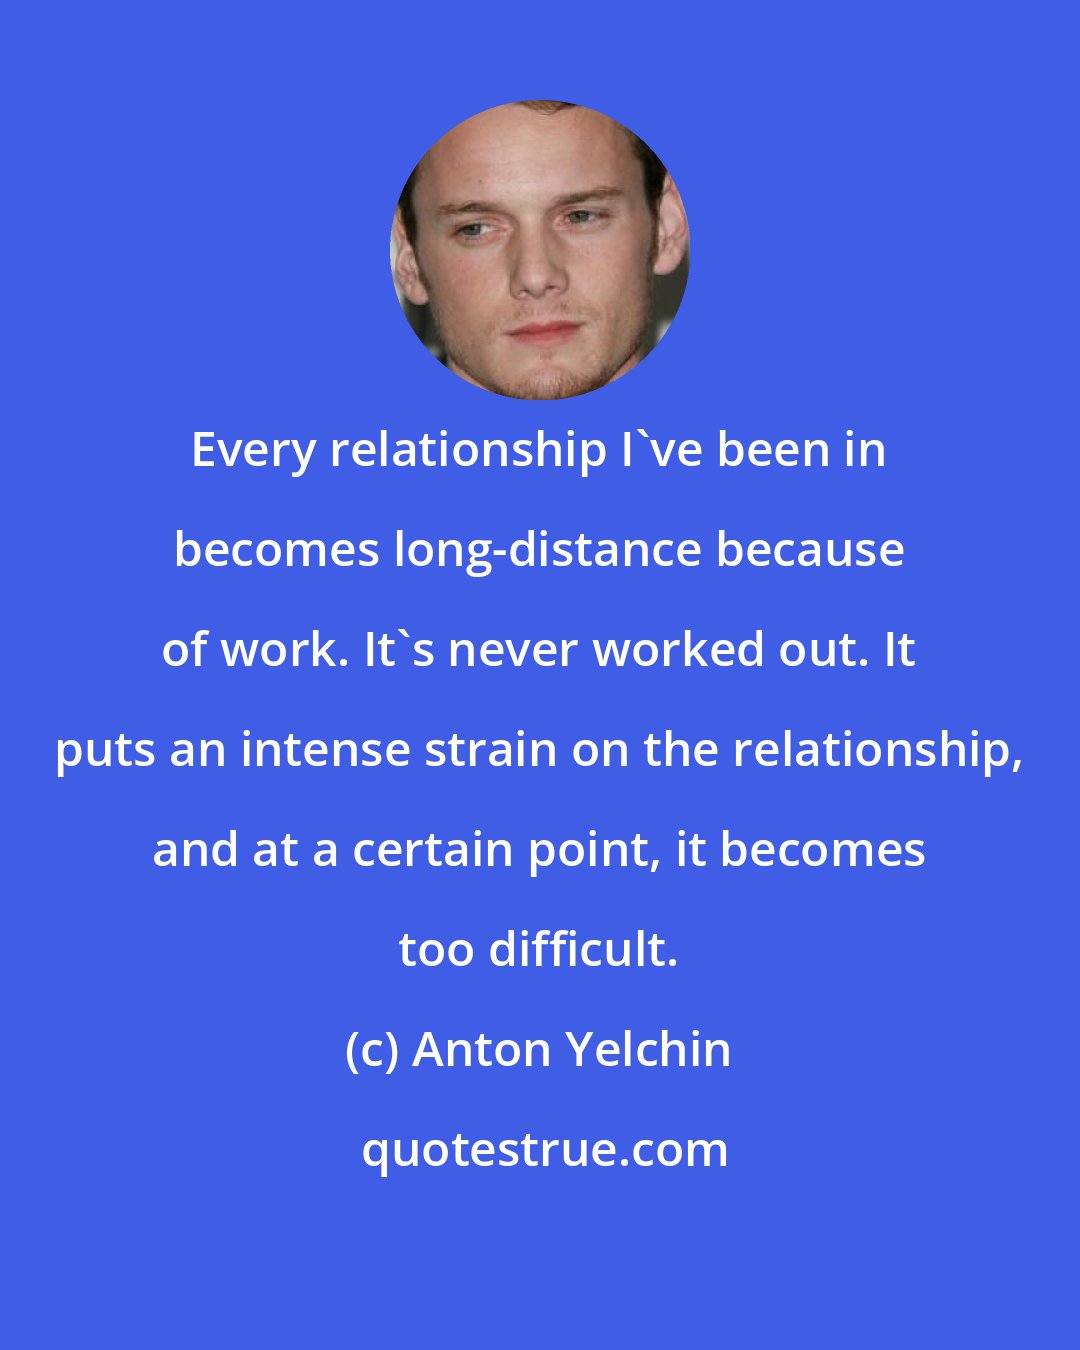 Anton Yelchin: Every relationship I've been in becomes long-distance because of work. It's never worked out. It puts an intense strain on the relationship, and at a certain point, it becomes too difficult.